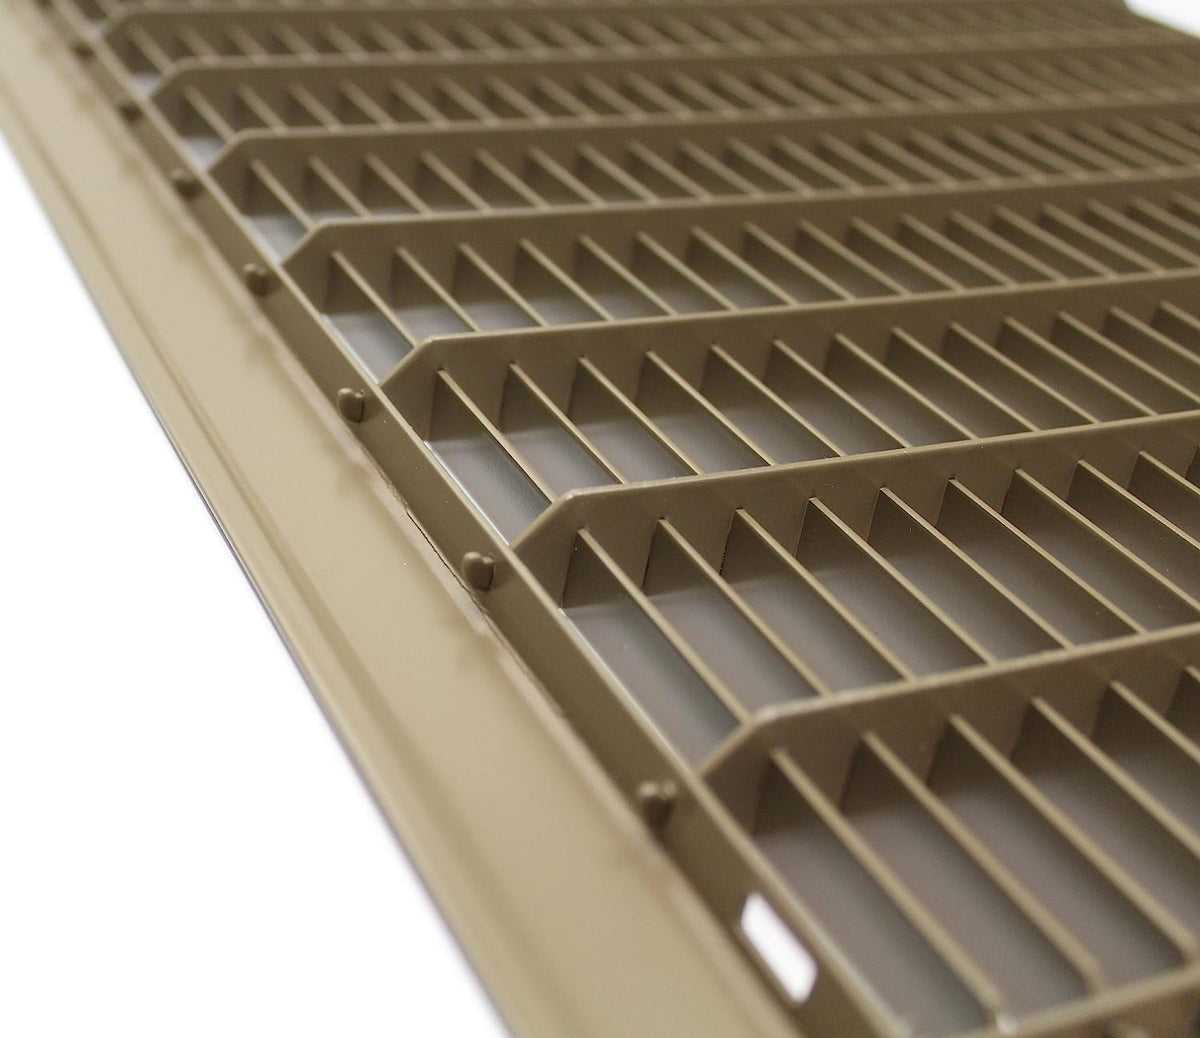 14&quot; X 20&quot; Or 20&quot; X 14&quot; Heavy Duty Floor Grille - Fixed Blades Air Grille - Brown [Outer Dimensions: 15.75 X 21.75]